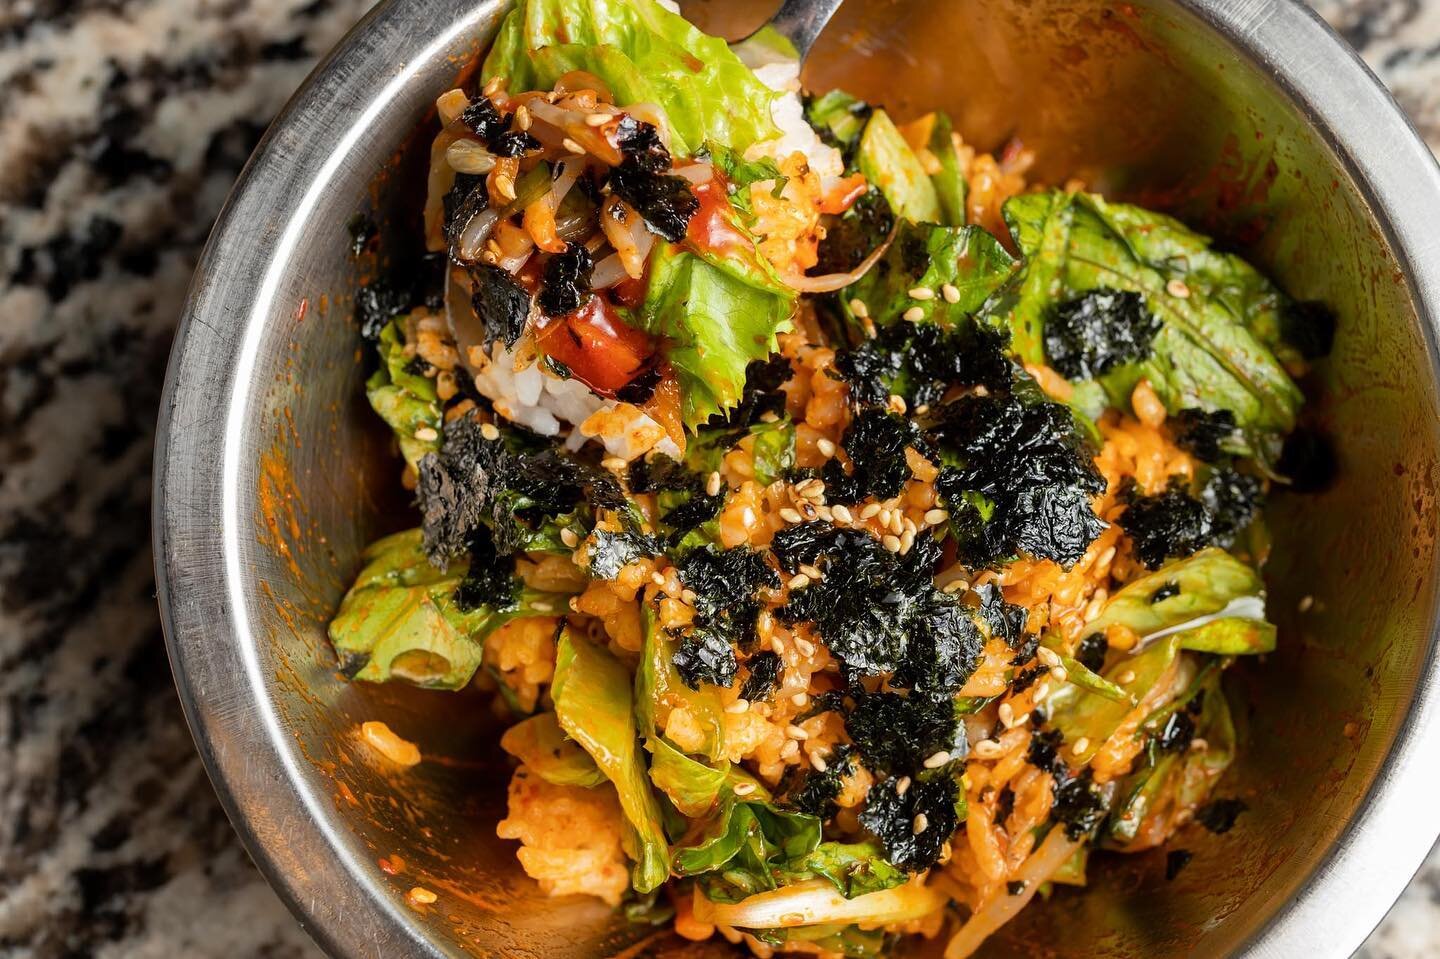 Don&rsquo;t let someone else&rsquo;s good times at @letsmeatkbbq make you jealous. You can create your special blend of memories here too! 🥗😋
.
#koreanbbq #allyoucaneat #letsmeat #letsmeatkbbq #charlottenc #southendclt #clt #cltnc #clteats #cltfood